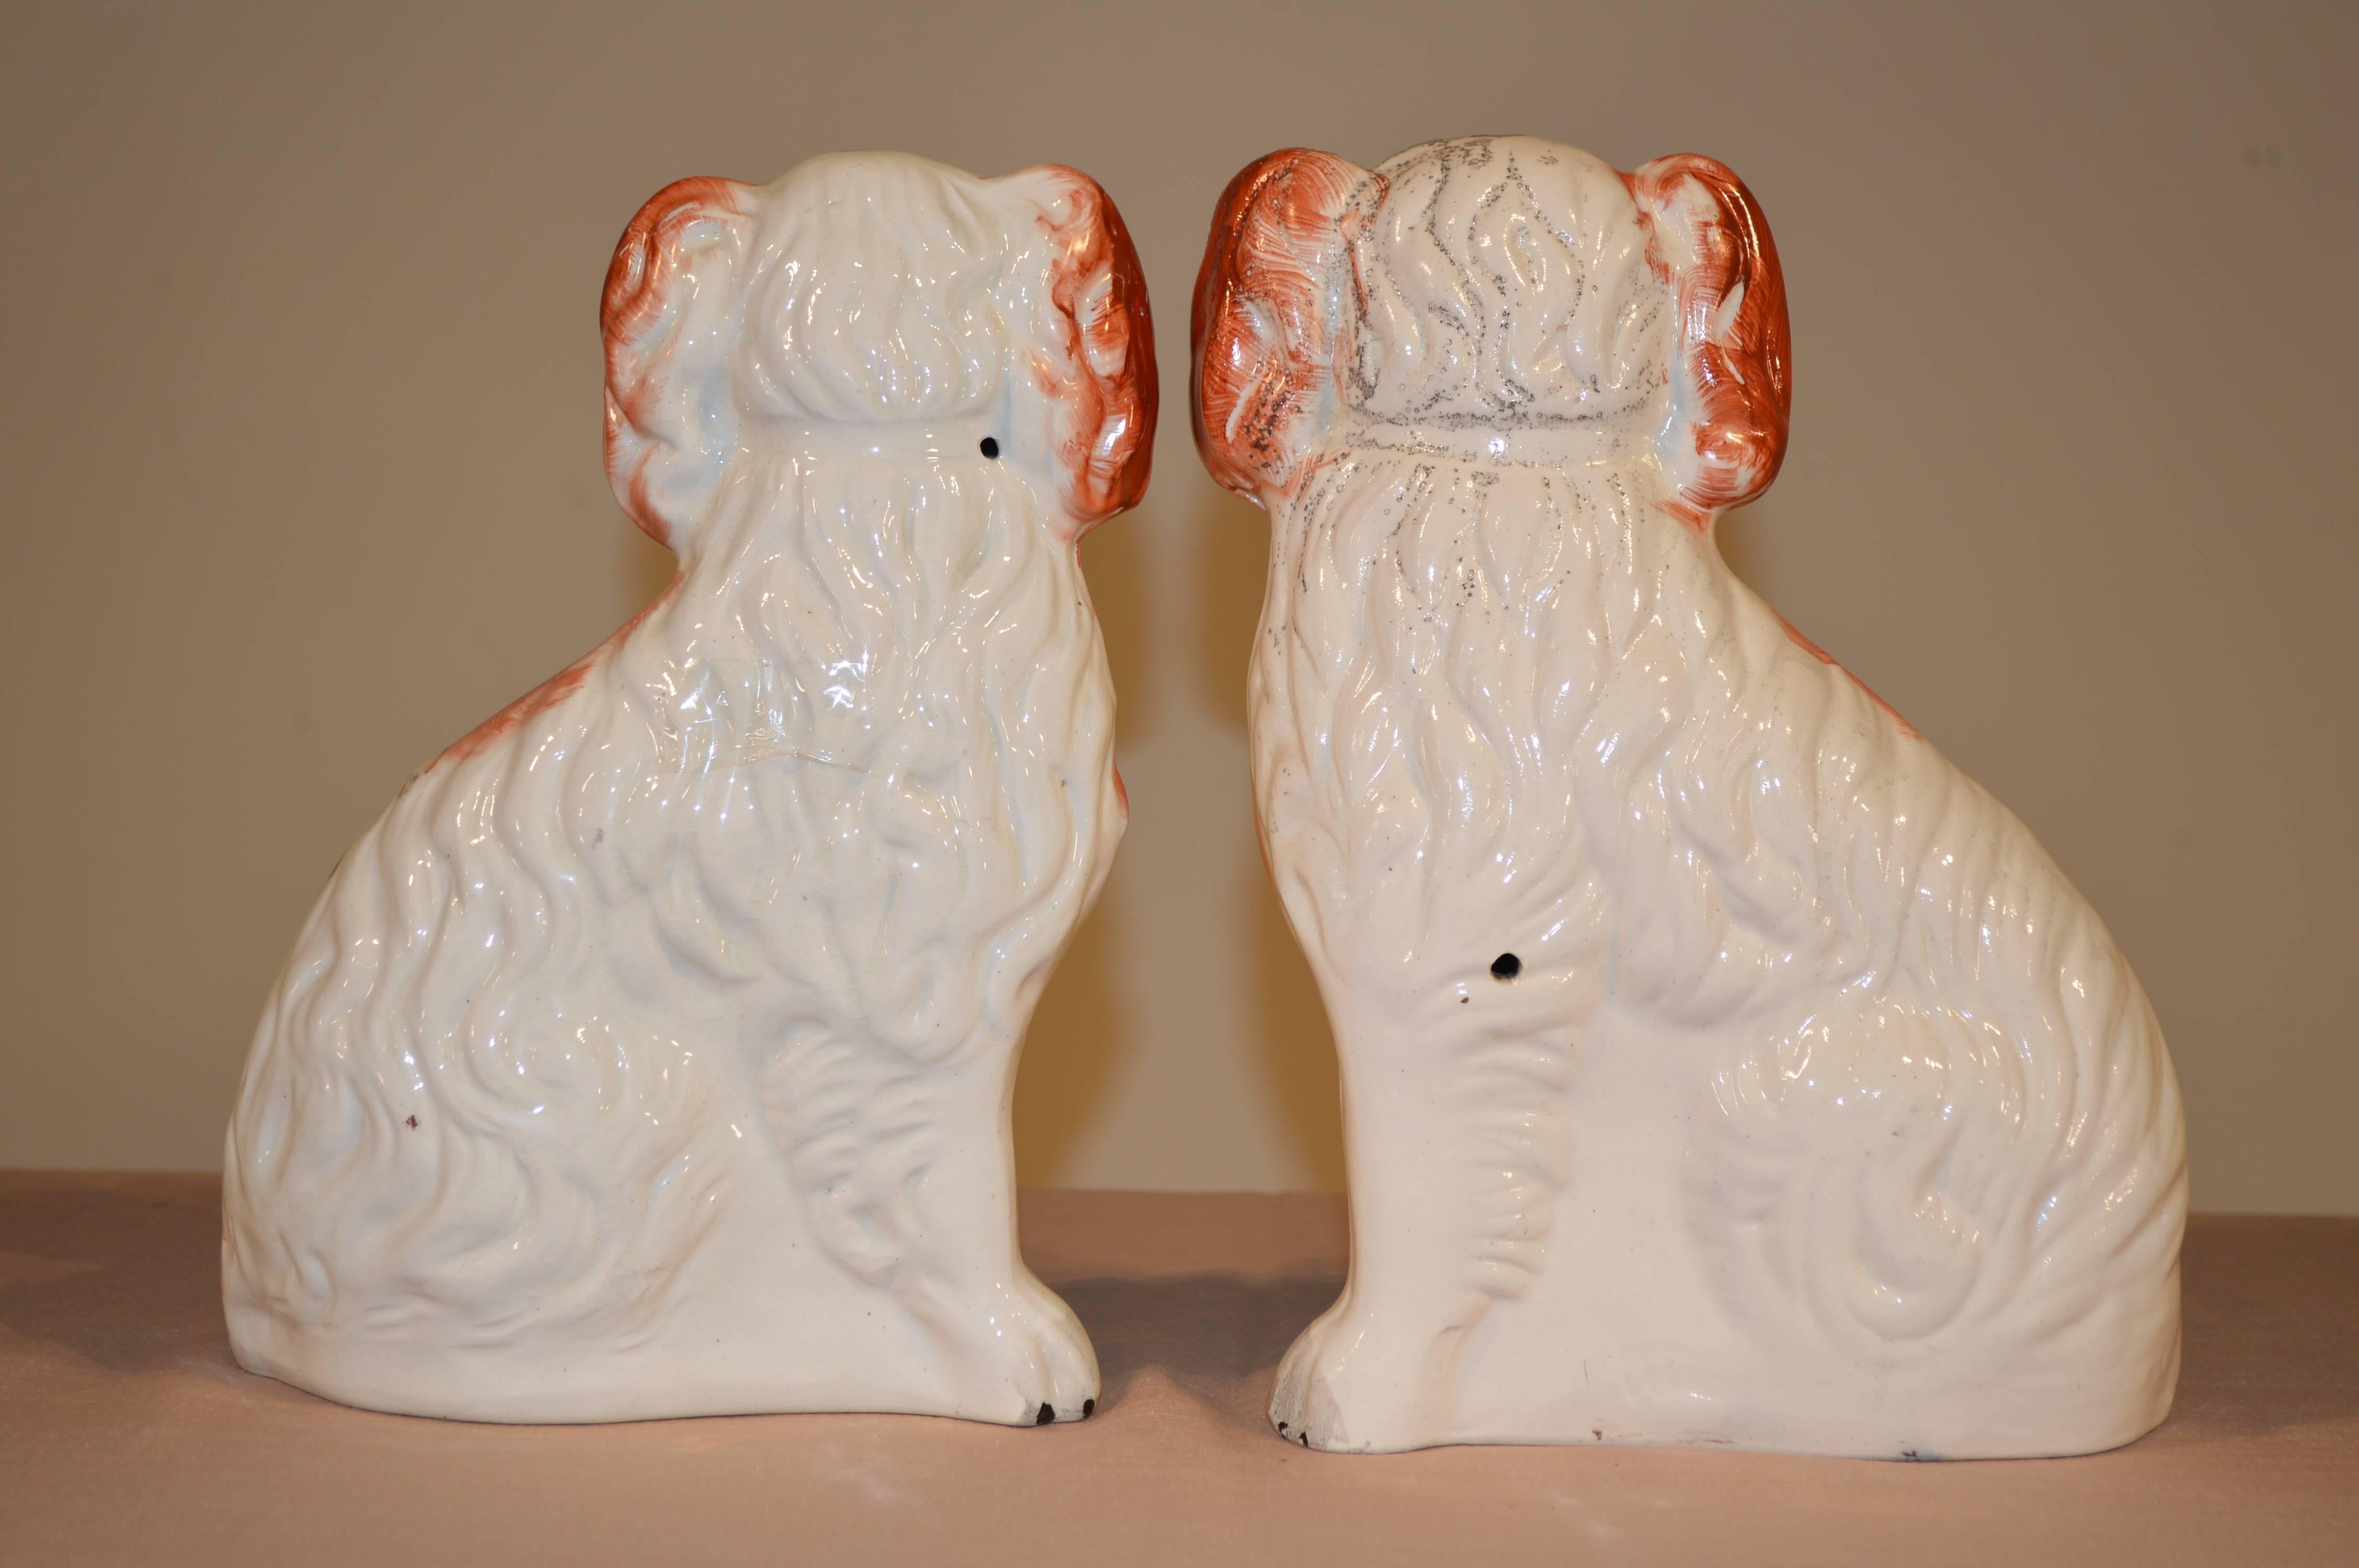 19th century pair of English Staffordshire spaniels in rust and white. Nicely figured mold and wonderful color.